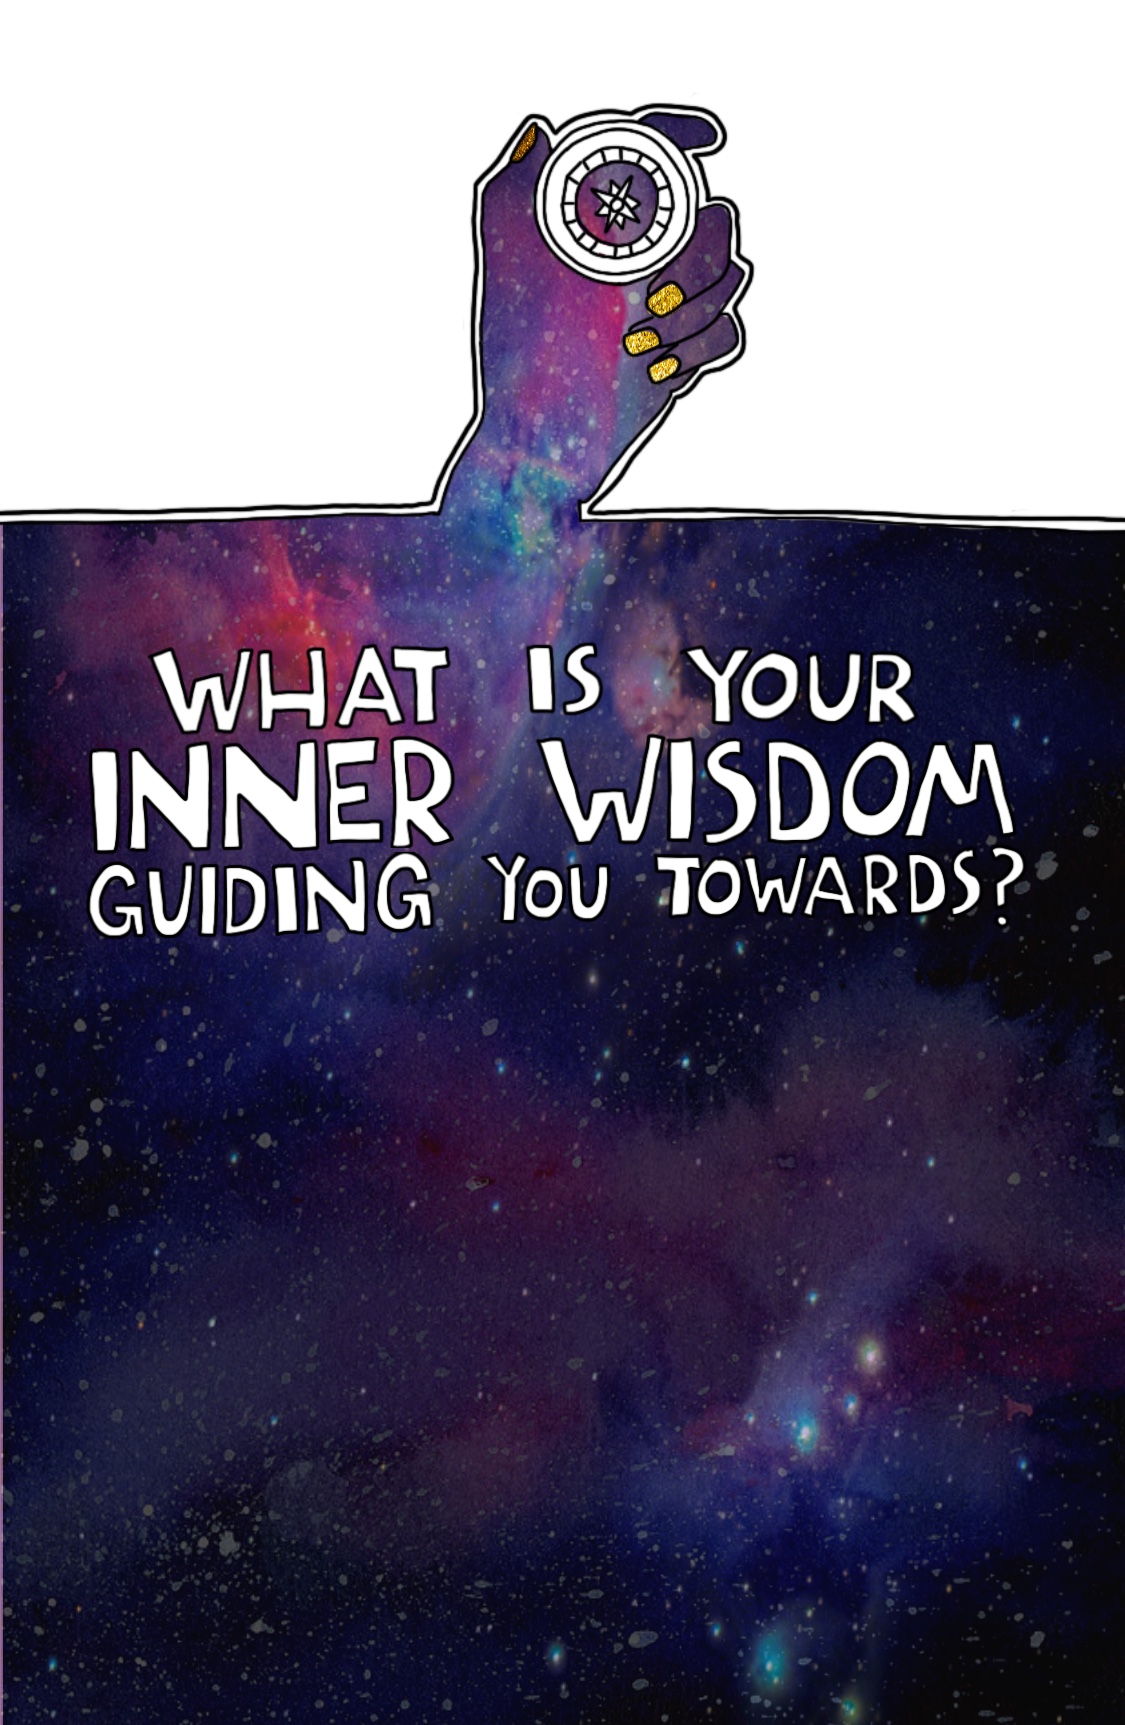 Journal Prompt: What is your inner wisdom guiding you towards?